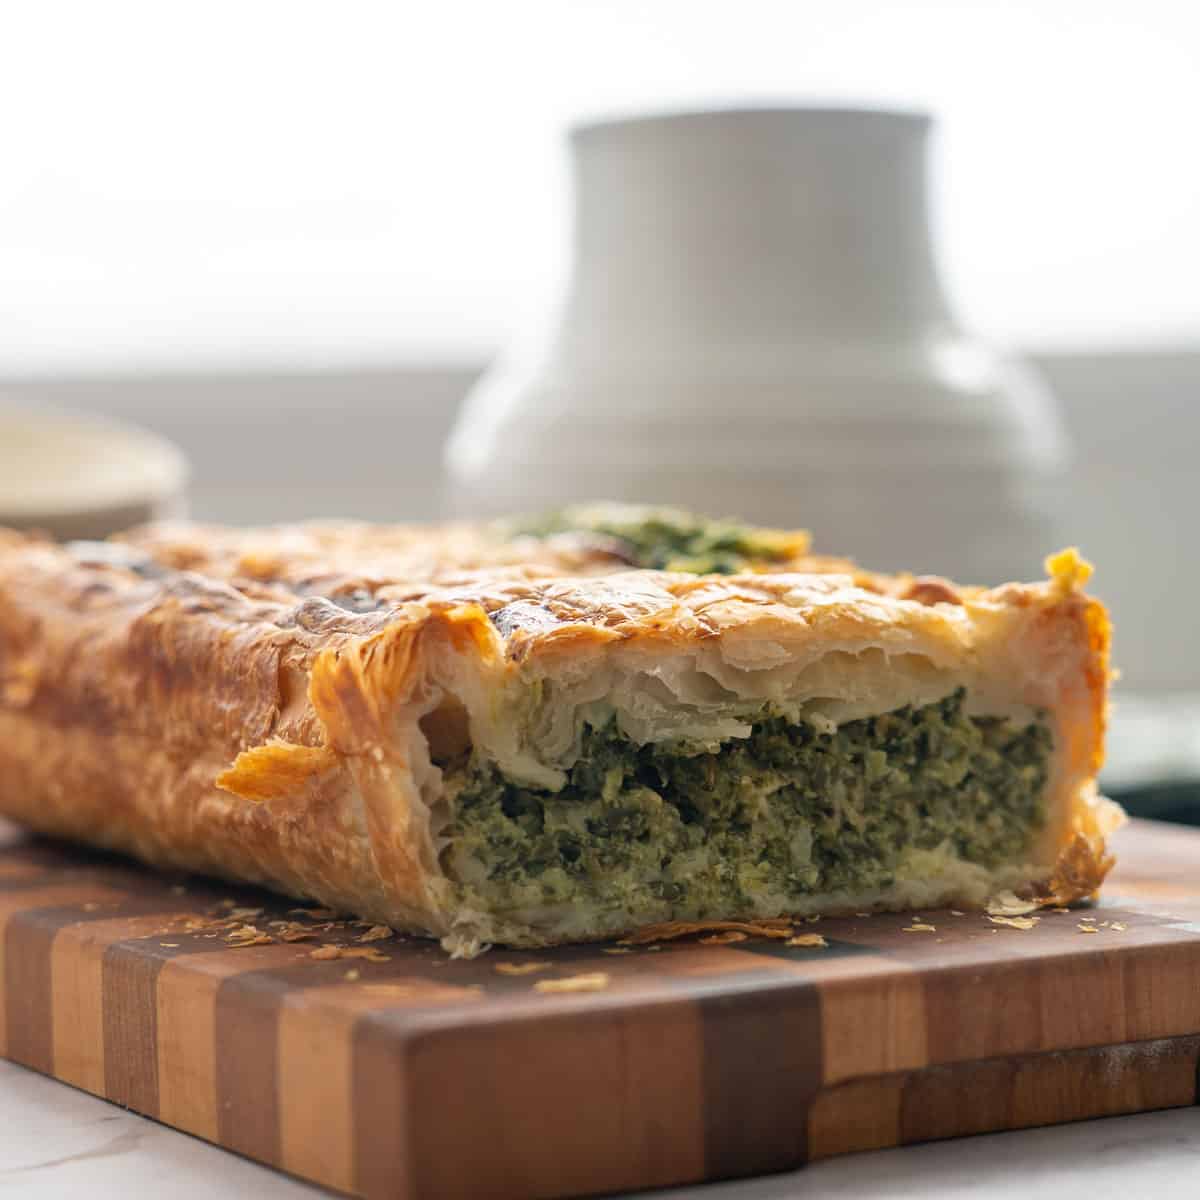 A pie with spinach filling cut into to show the vibrant green filling. 